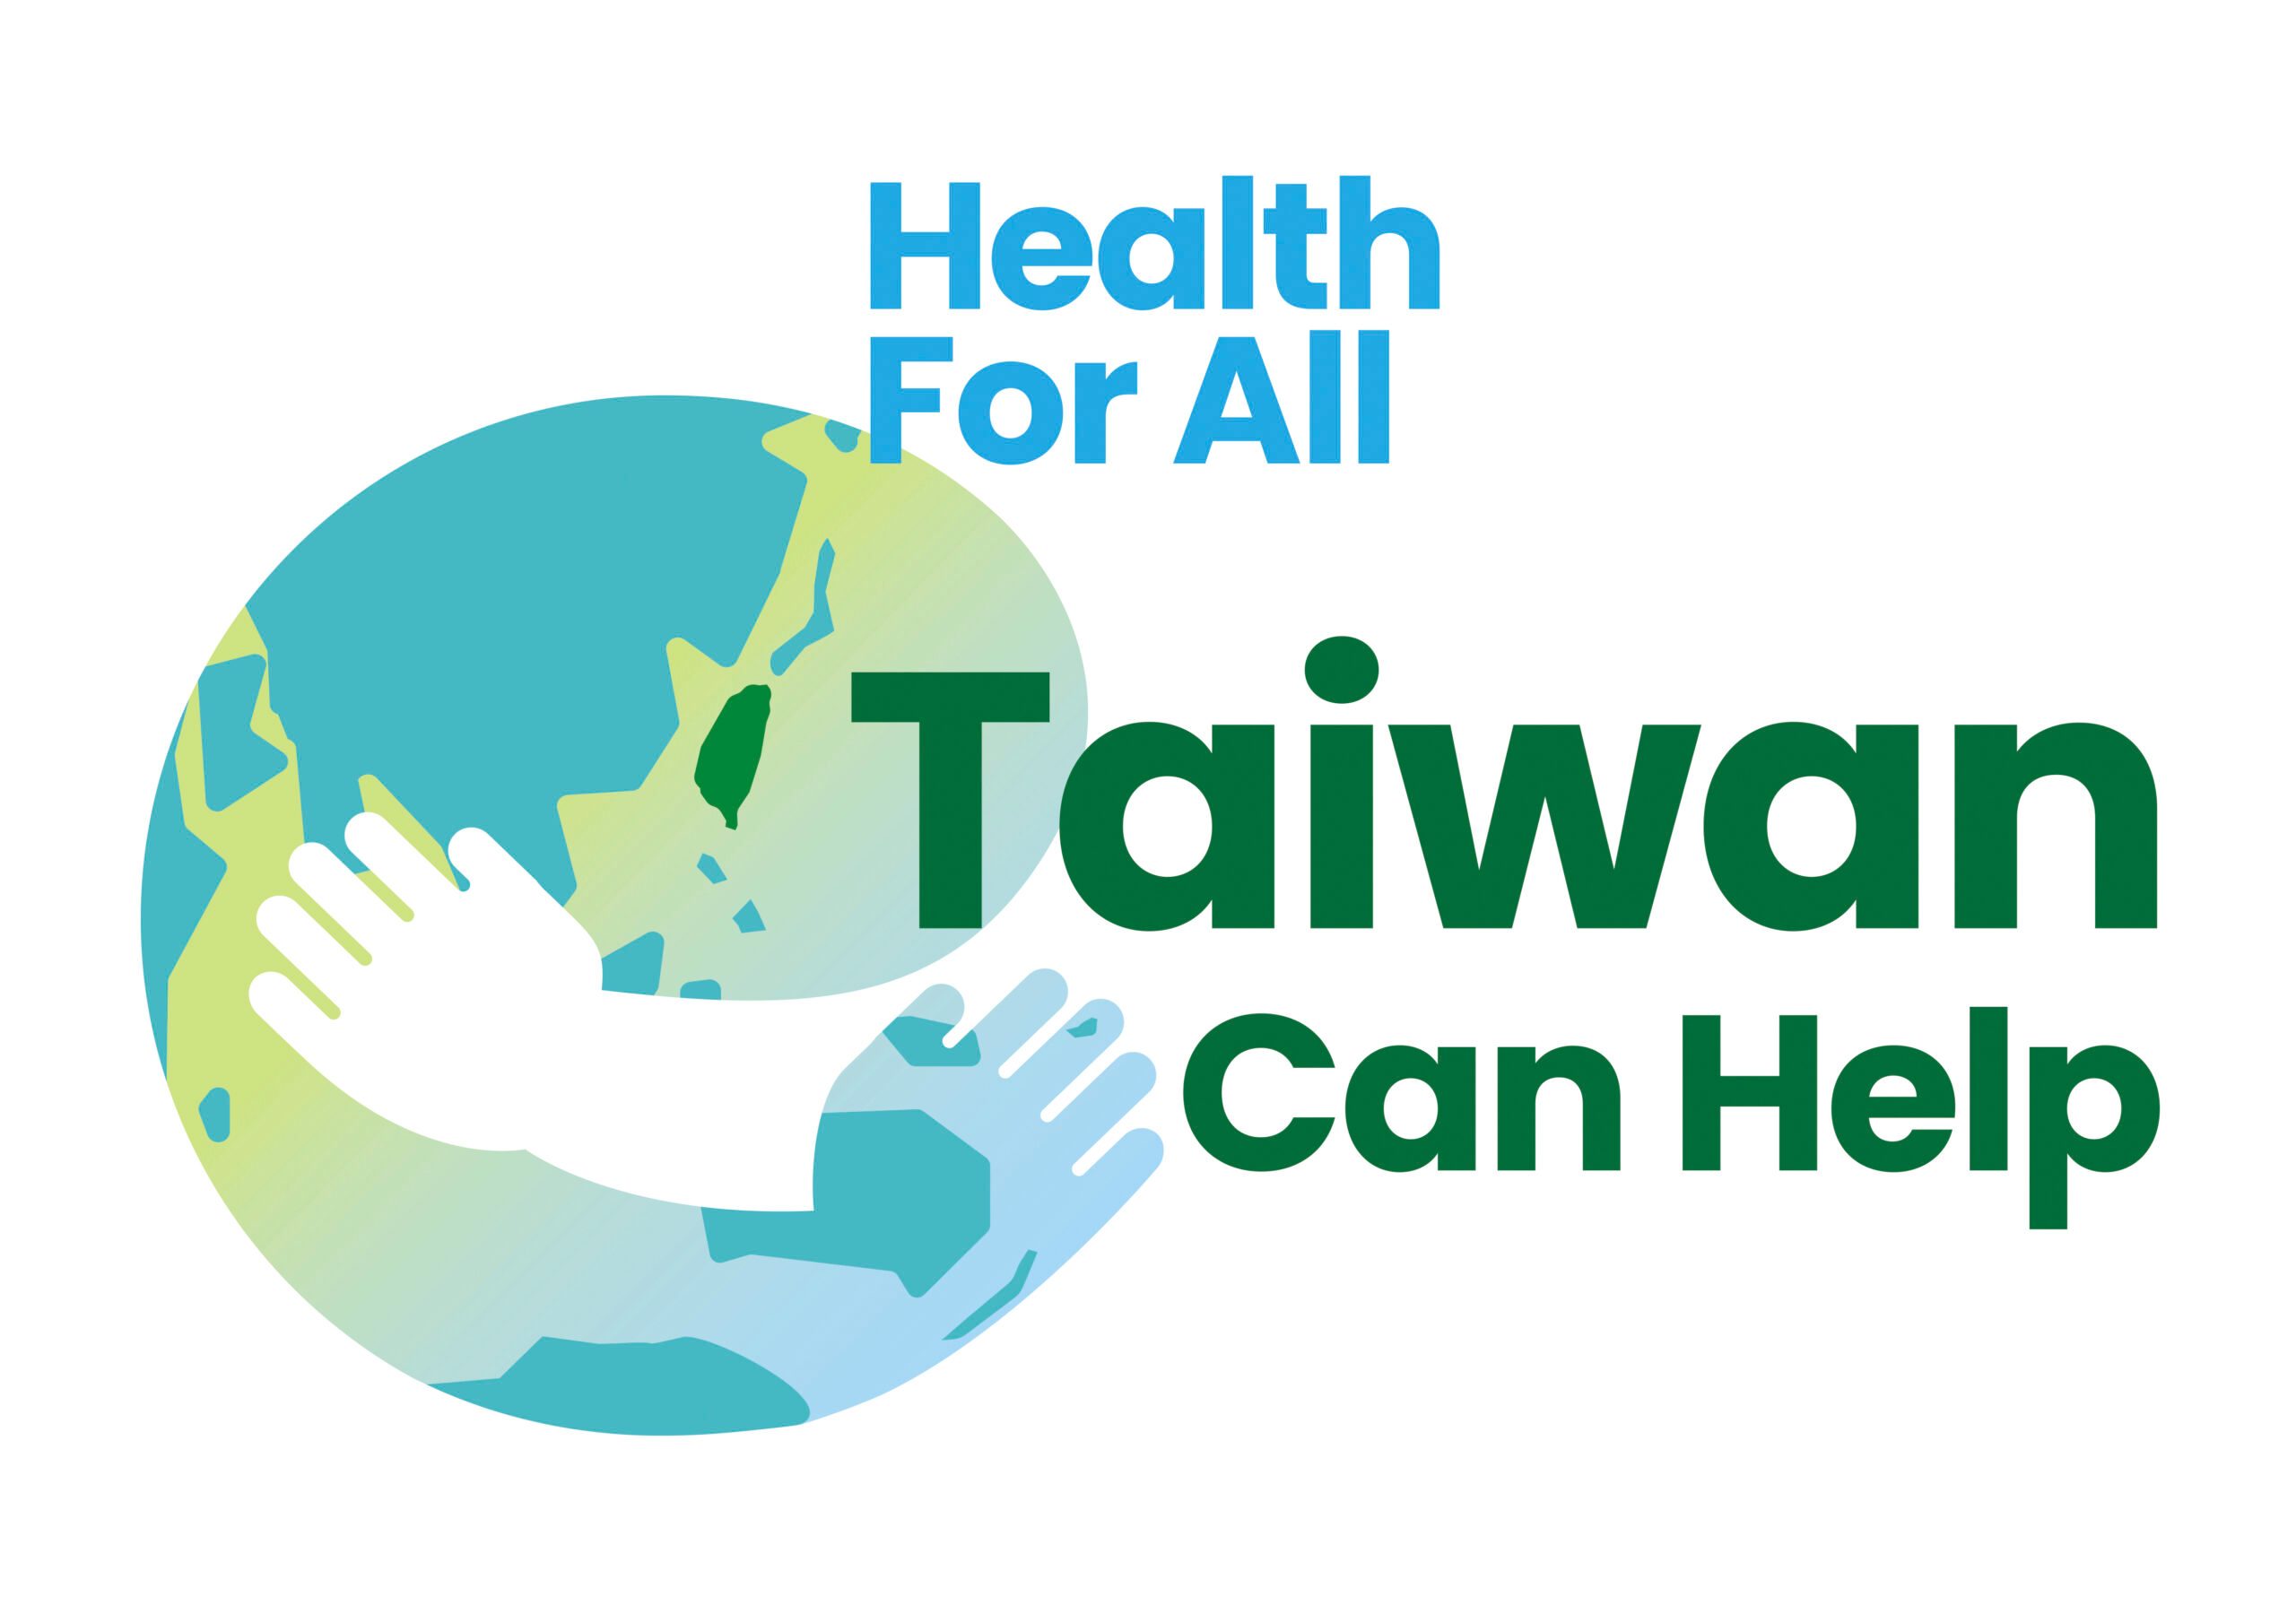 [OPINION] A force for good: Inviting Taiwan to the 75th World Health Assembly